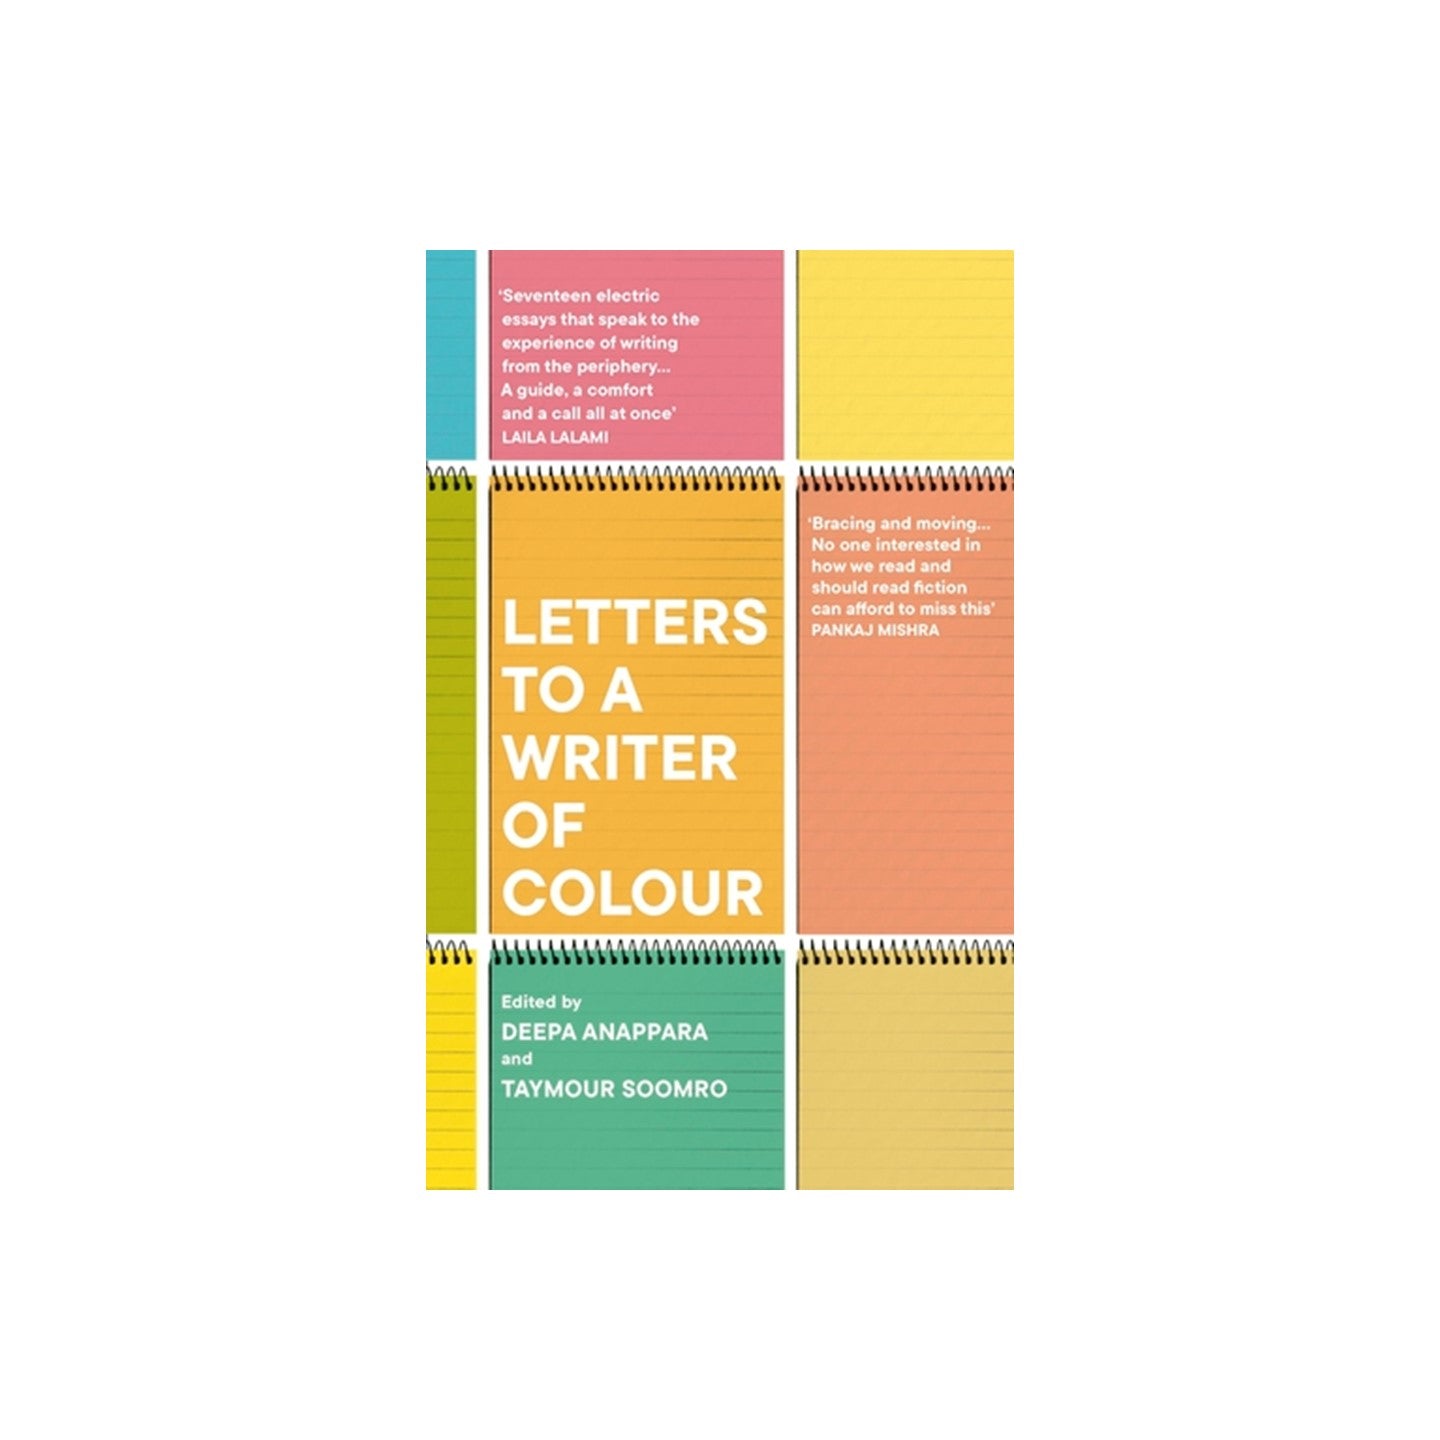 Letters to a Writer of Colour: Essays on Craft, Race and Culture by Deepa Anappara and Taymour Soomro (editors)